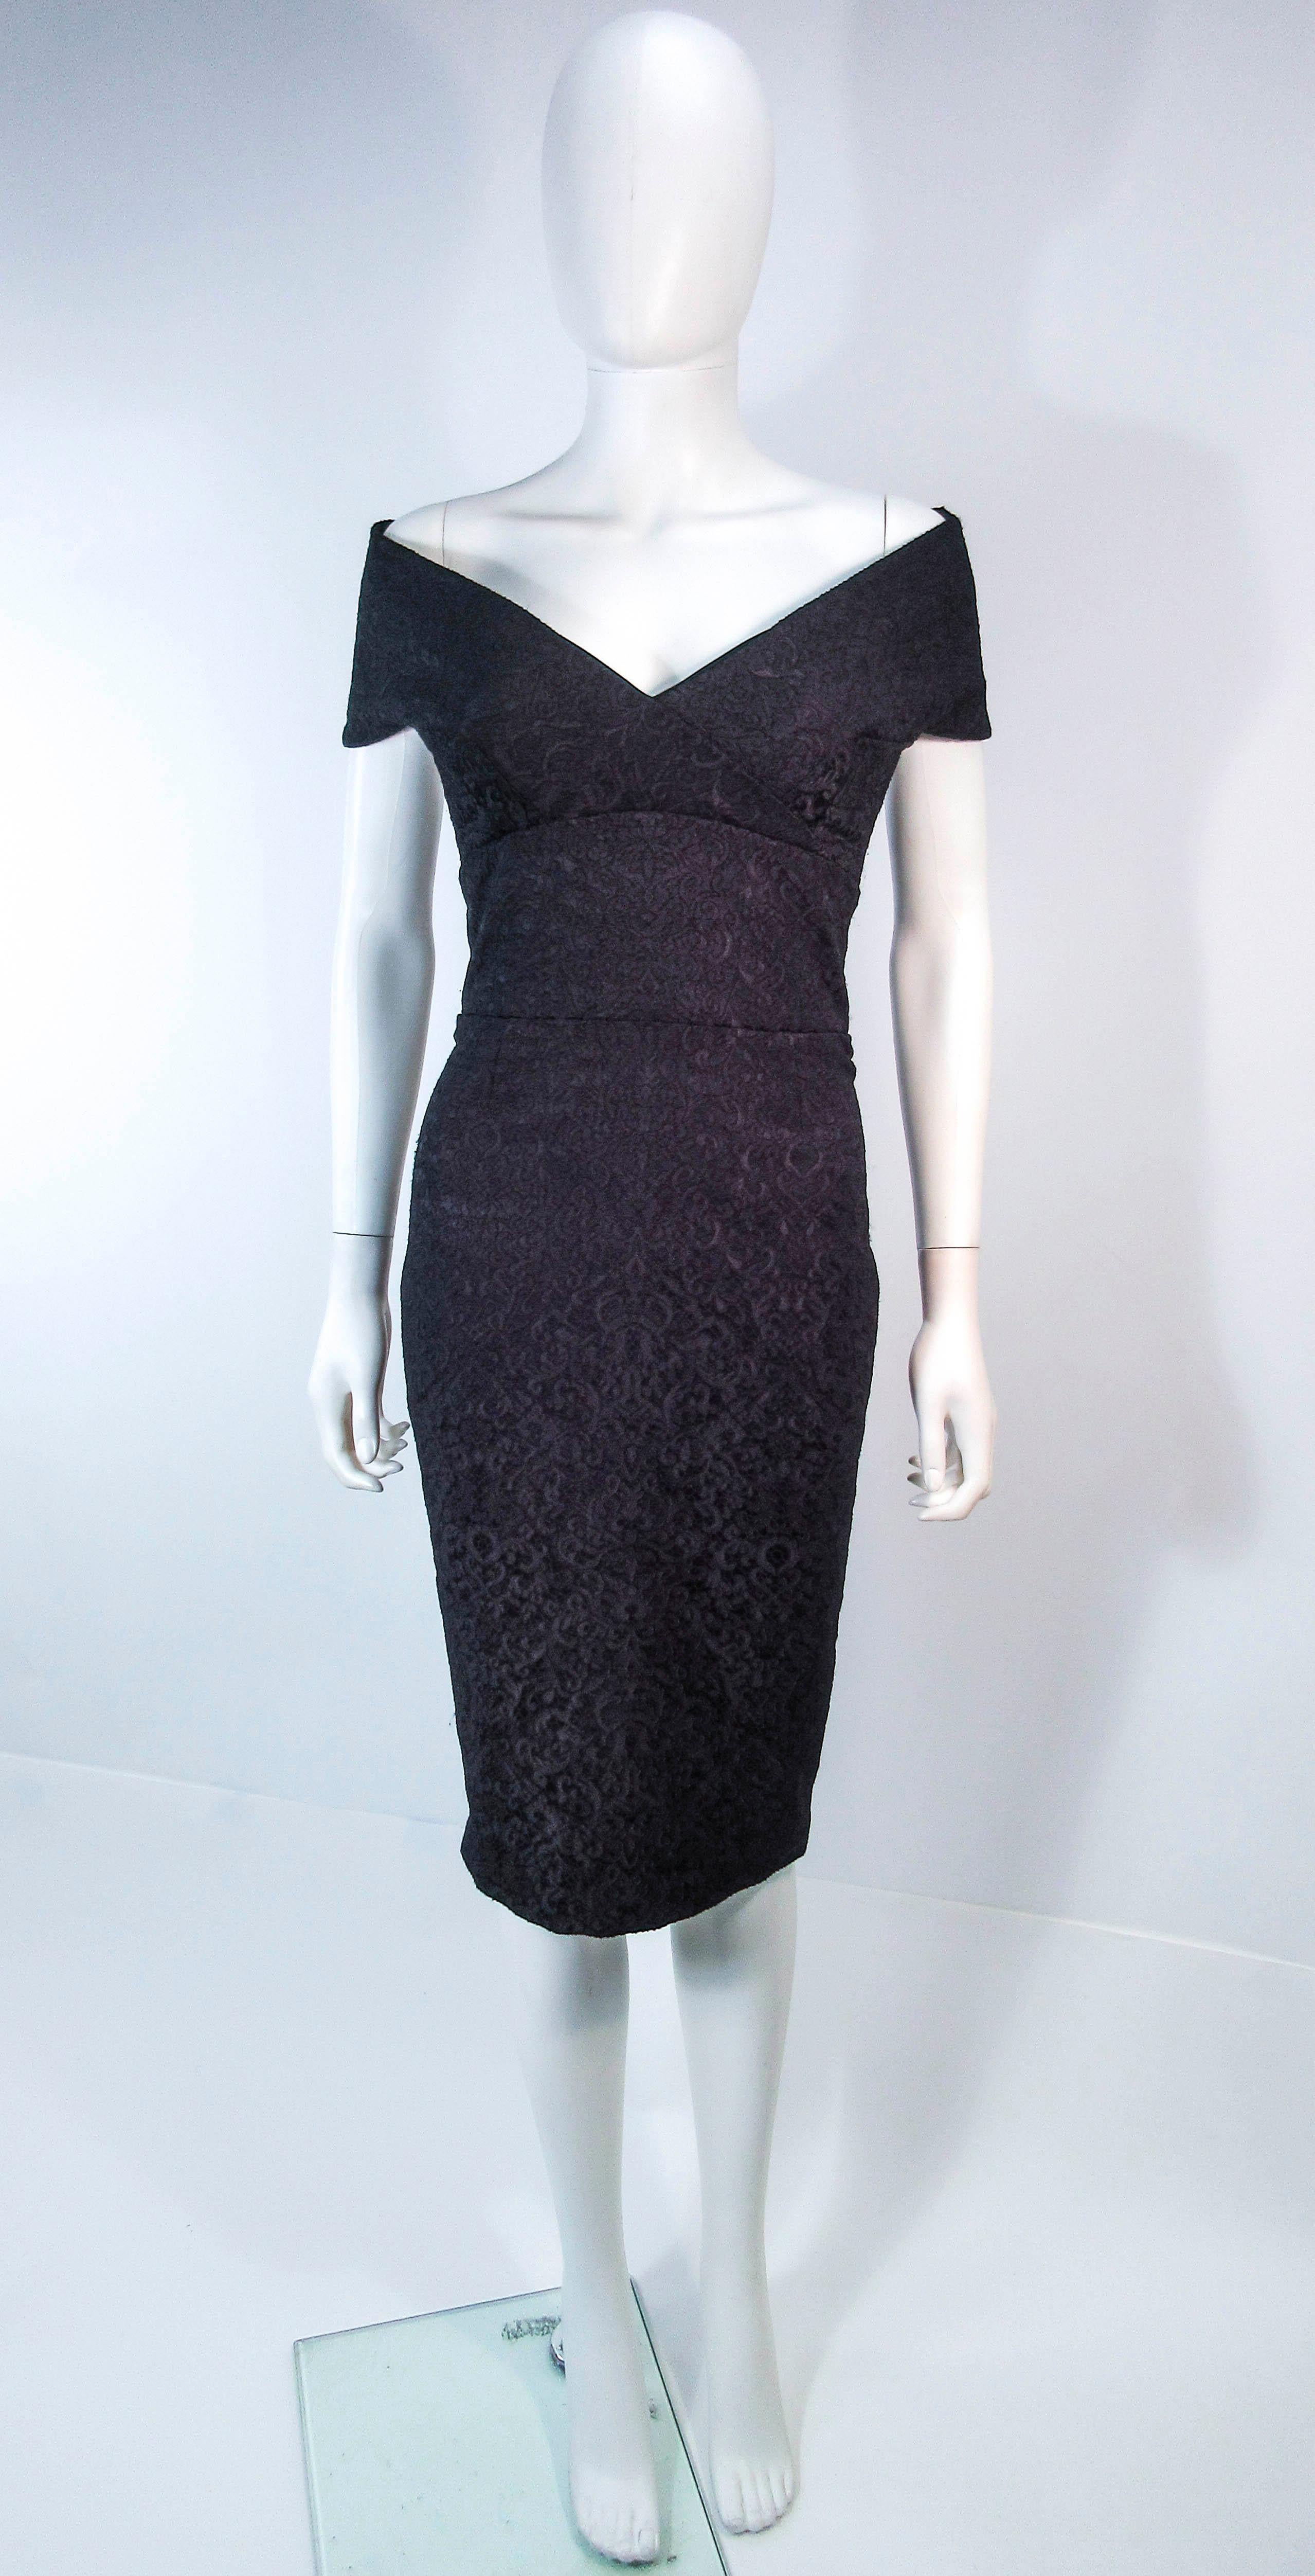 This Elizabeth Mason Couture cocktail dress is composed of a stretch brocade. This fabric is one of a kind, and can be made to order in a variety of fabrics. This halter unique halter style features a nipped waist with a sleek pencil silhouette, and